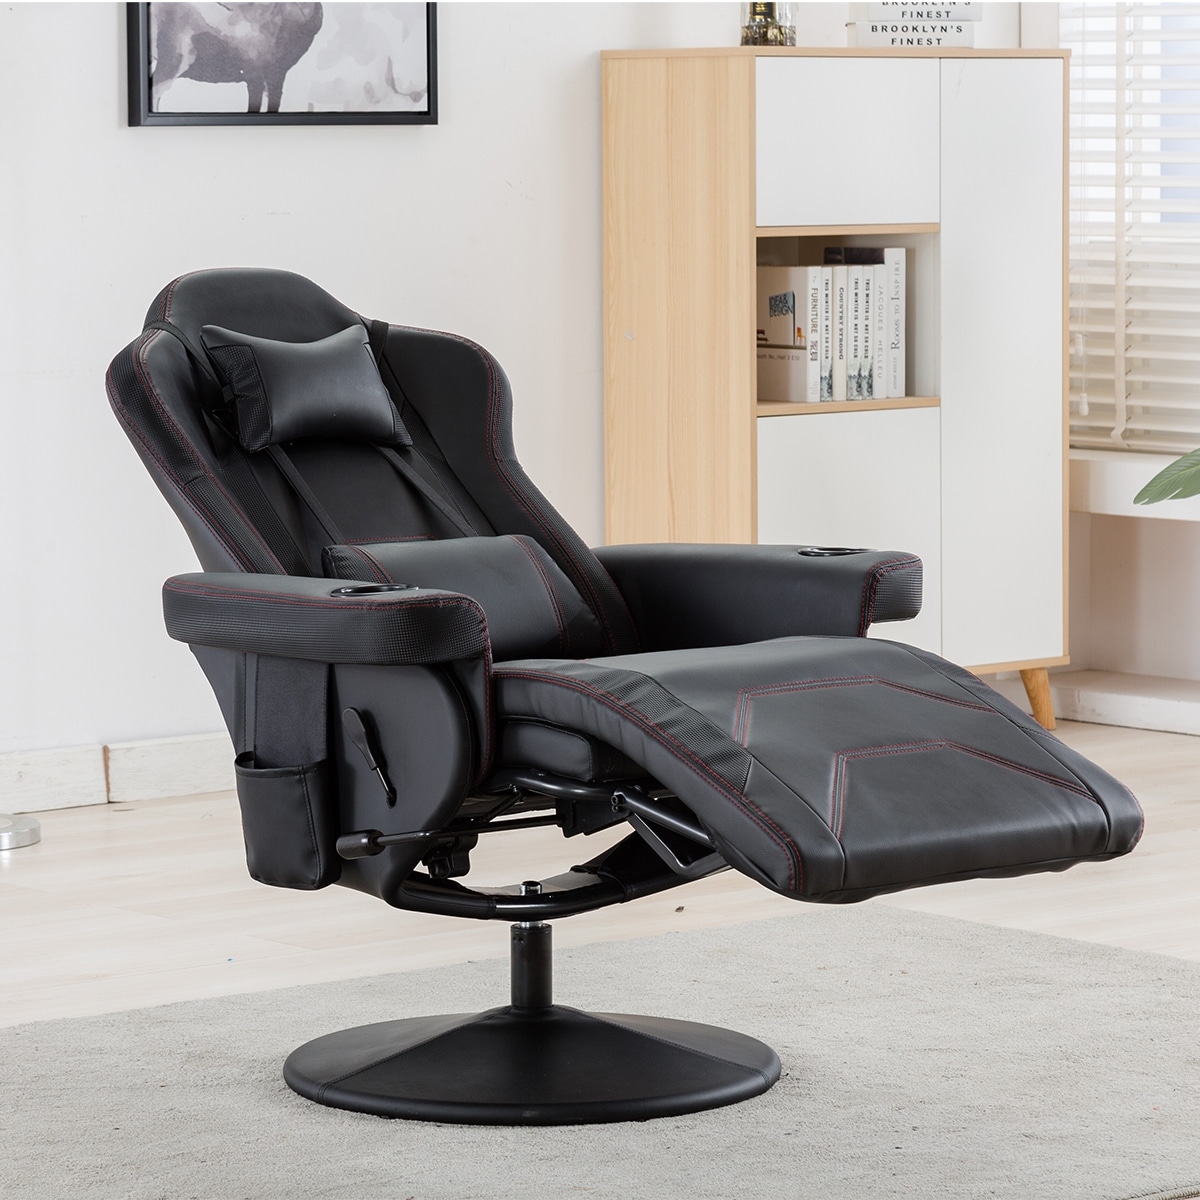 https://ak1.ostkcdn.com/images/products/is/images/direct/11dcc7b9c83260d084a27101c6670e9438aca439/Recliner-Gaming-Chair%2CAdjustable-headrest%2Clumbar-support.jpg